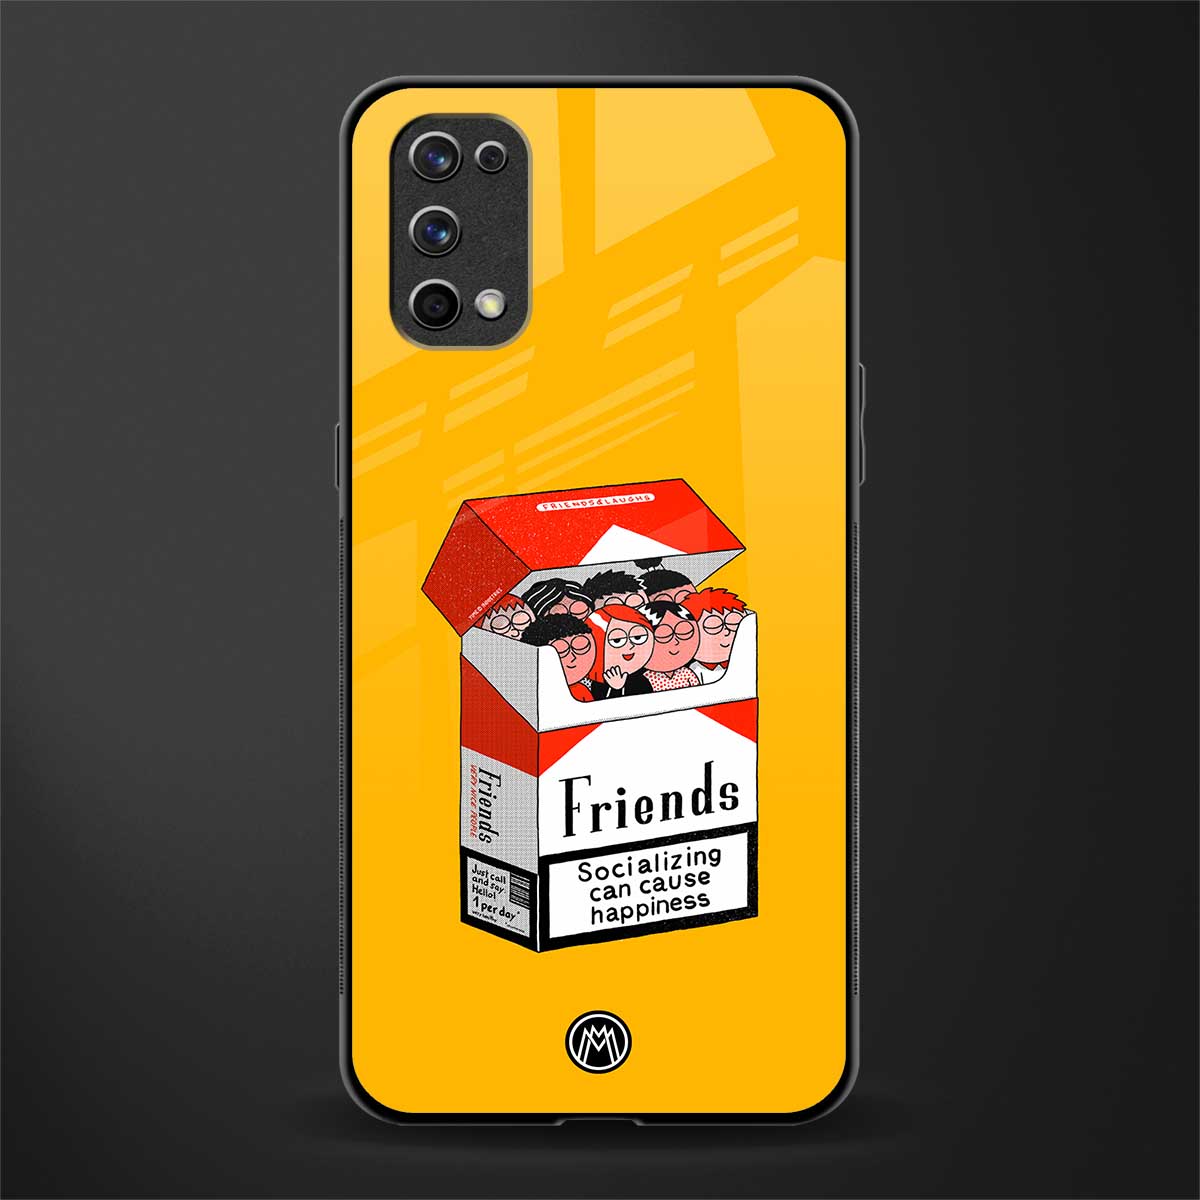 socializing can cause happiness glass case for realme 7 pro image